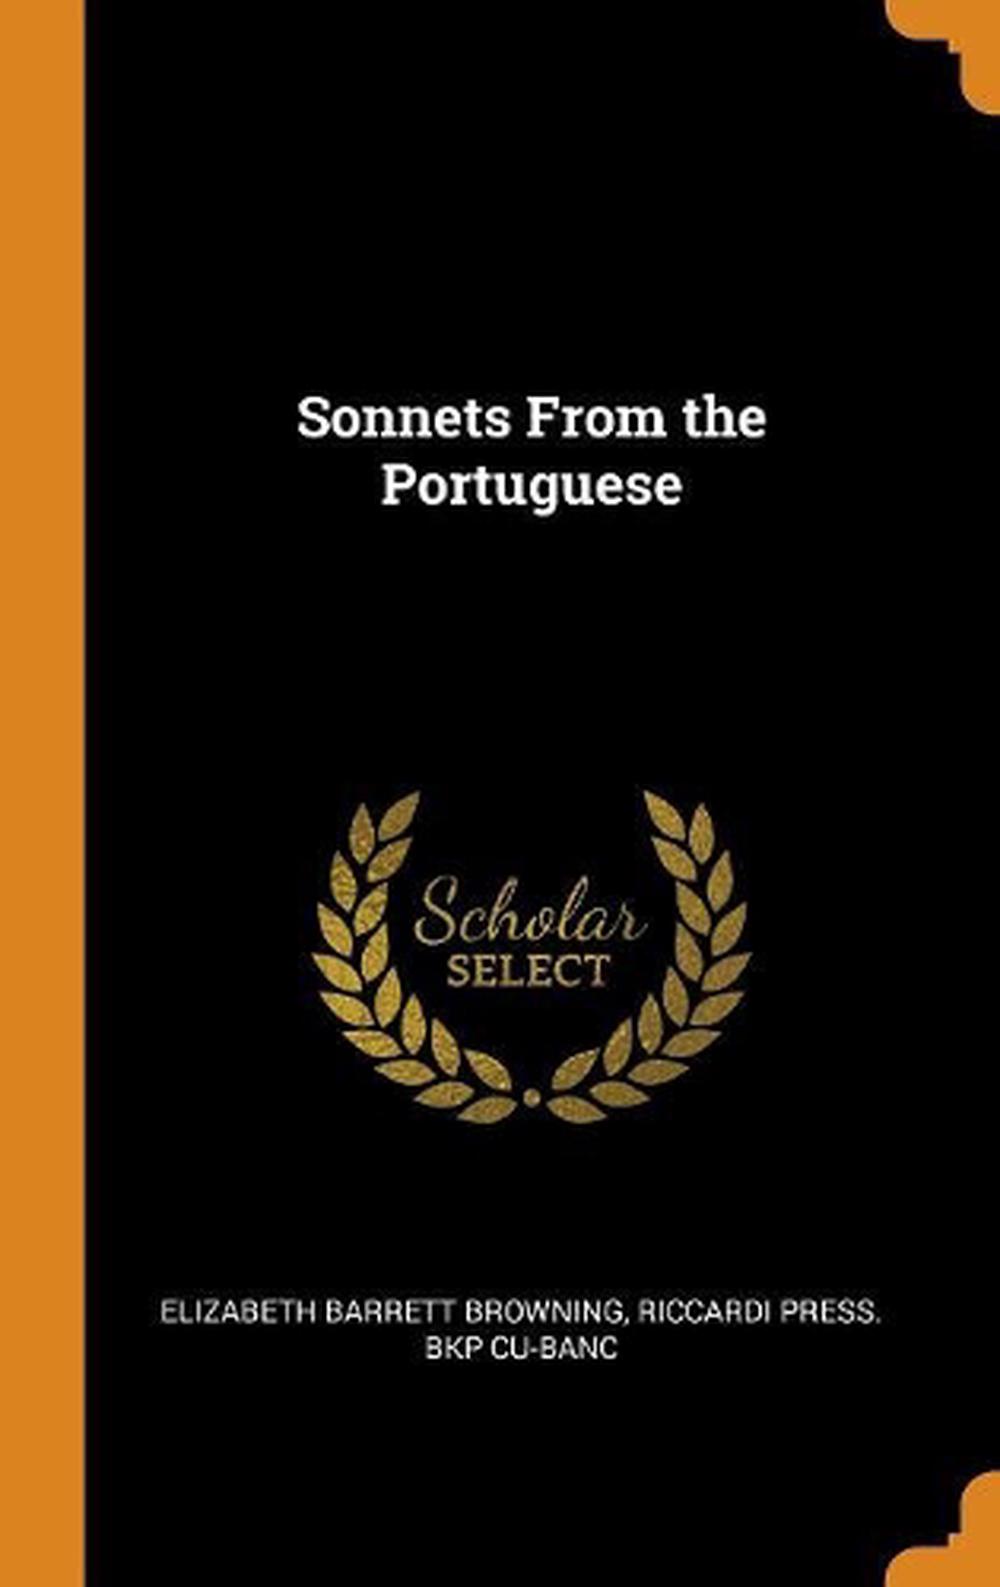 barrett browning sonnets from the portuguese